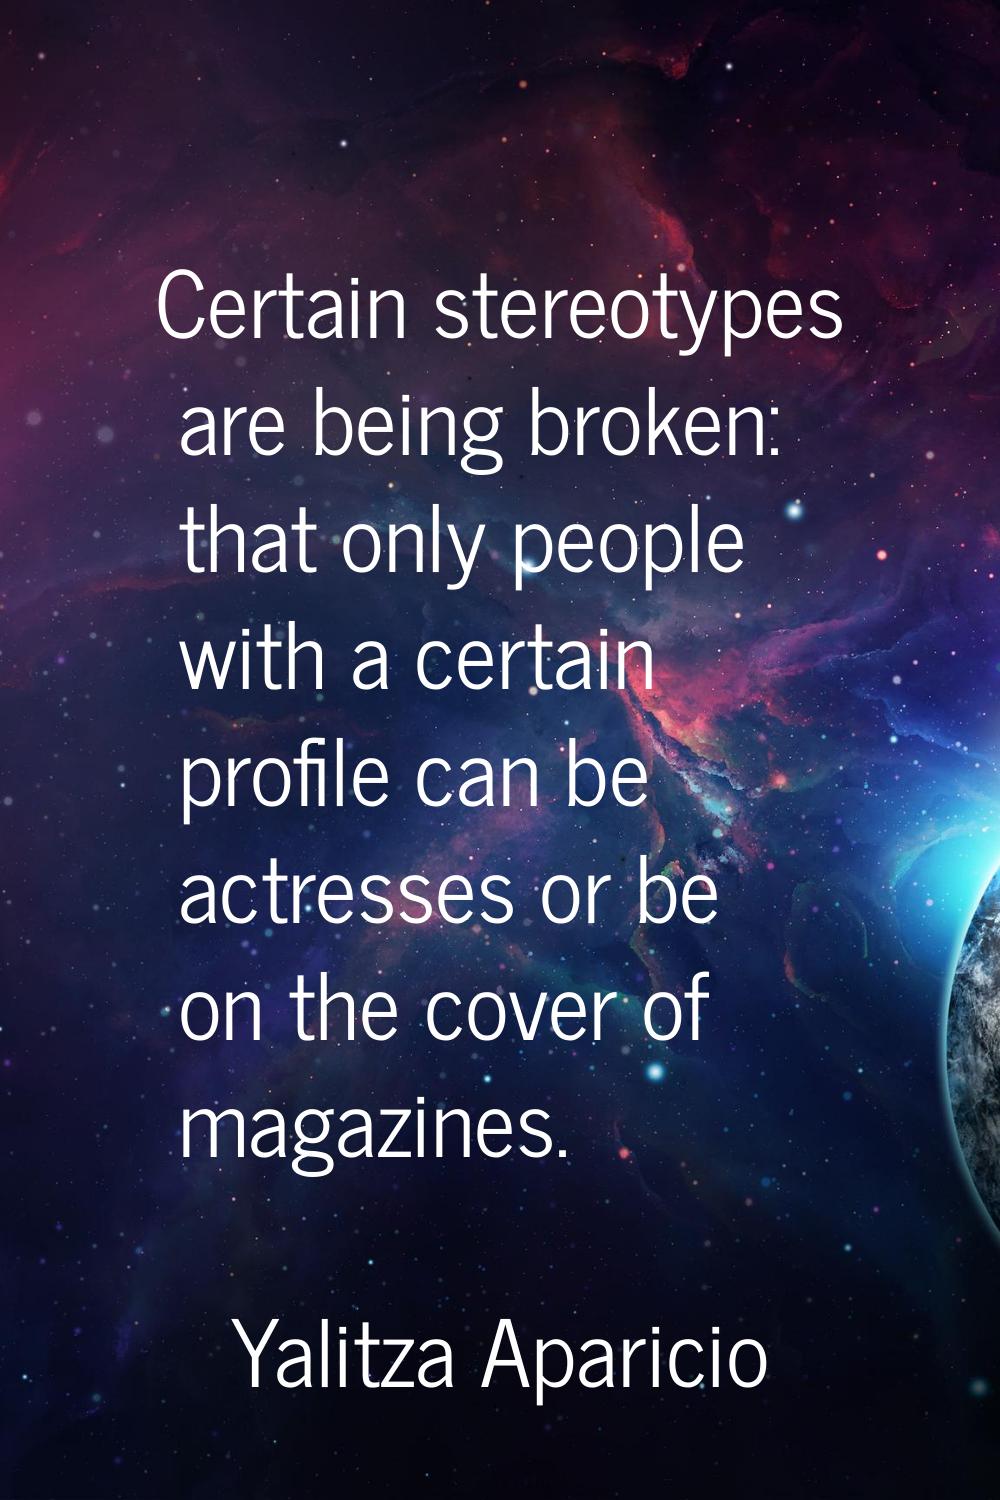 Certain stereotypes are being broken: that only people with a certain profile can be actresses or b